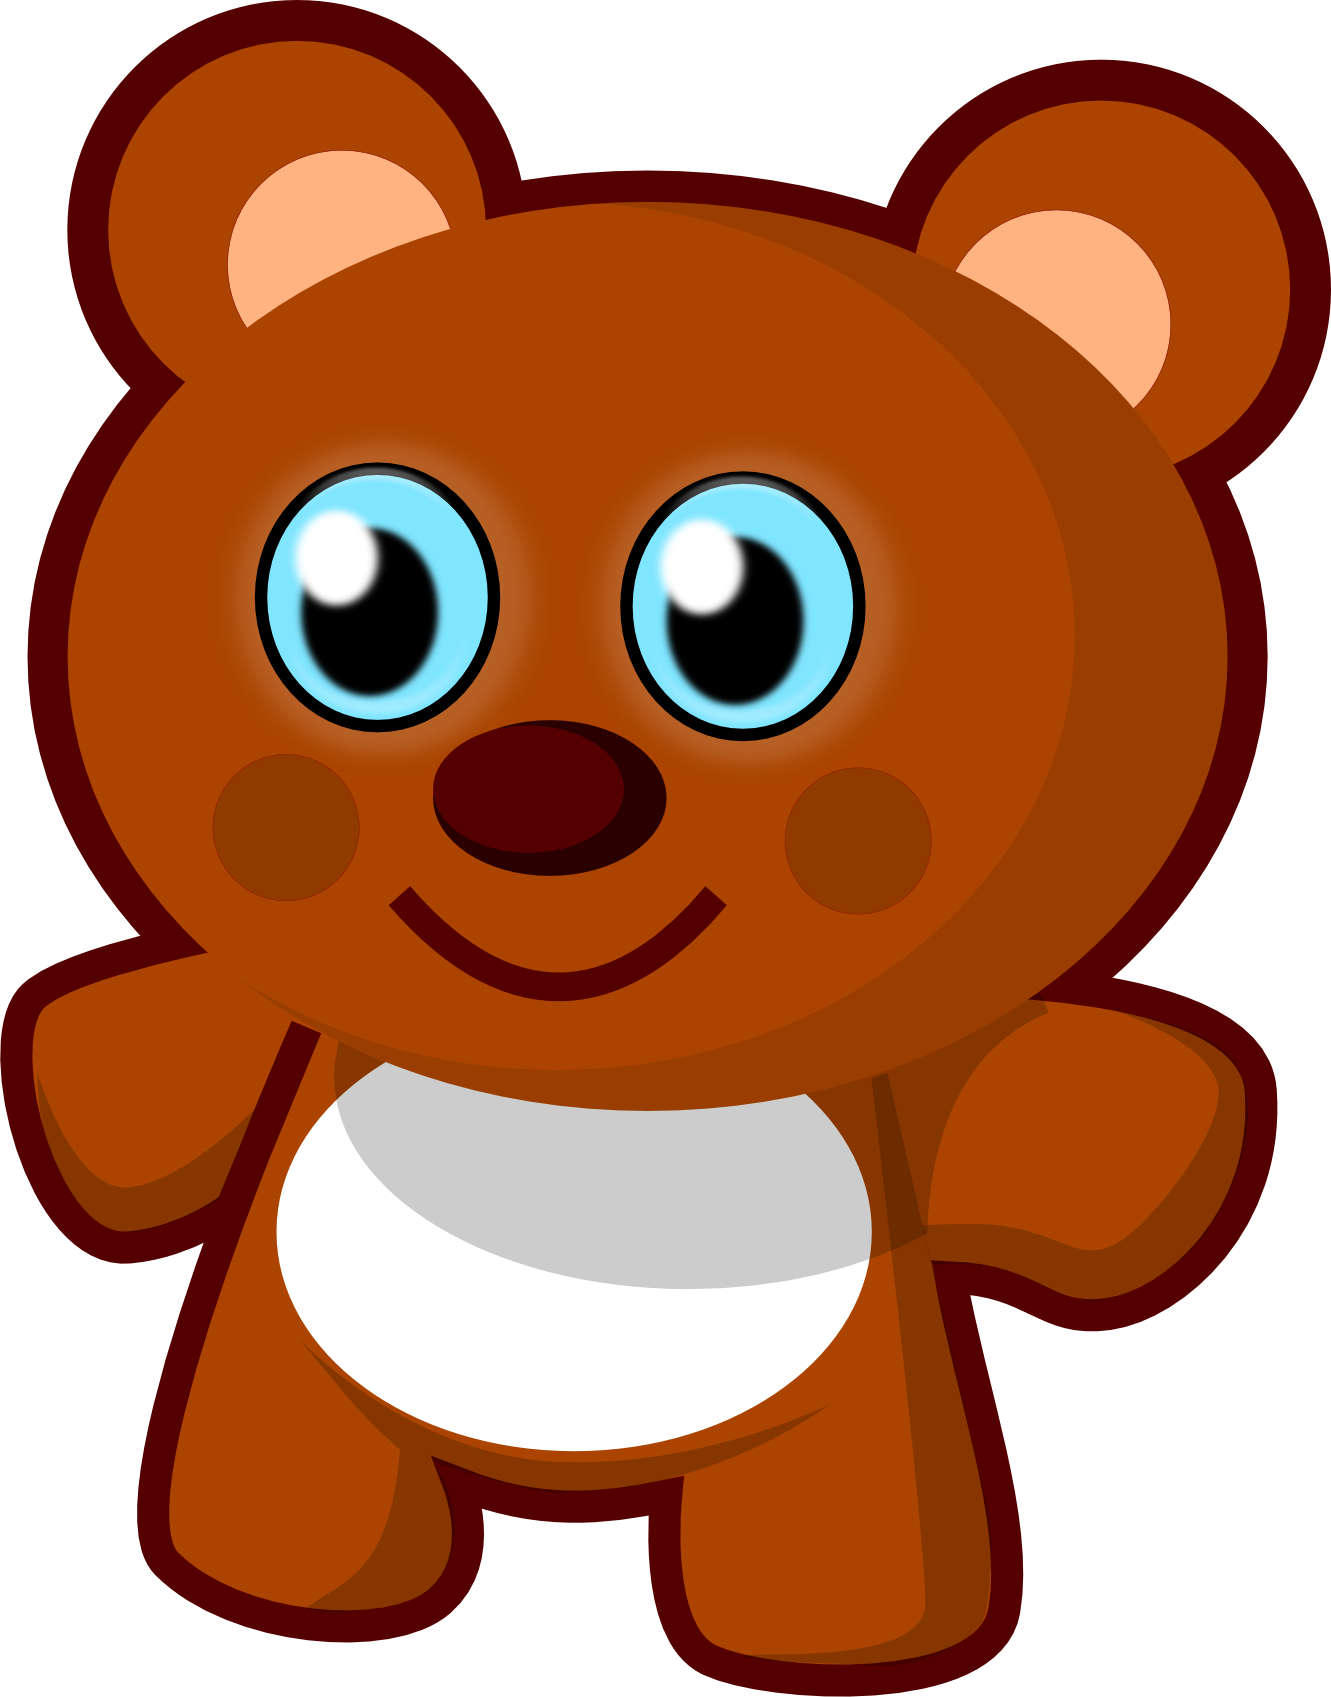 Teddy bear clip art free clipart images 3 clipartbold